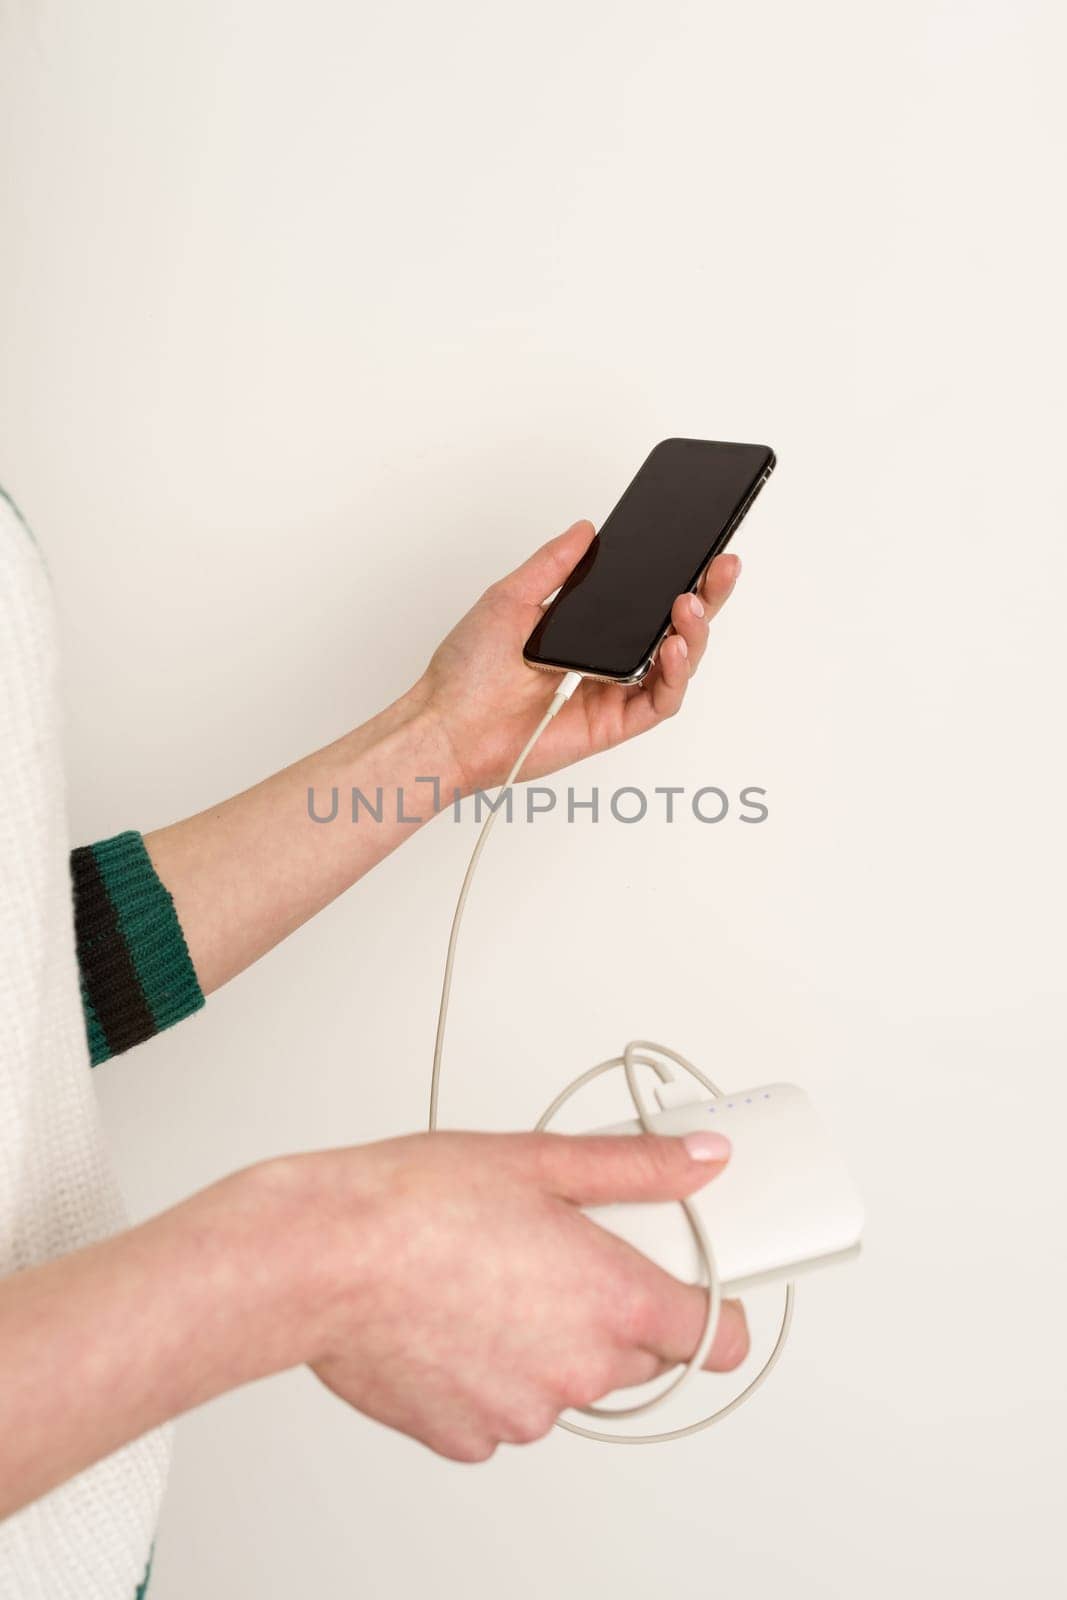 emale hands holding and using smartphone while charging power bank by zartarn